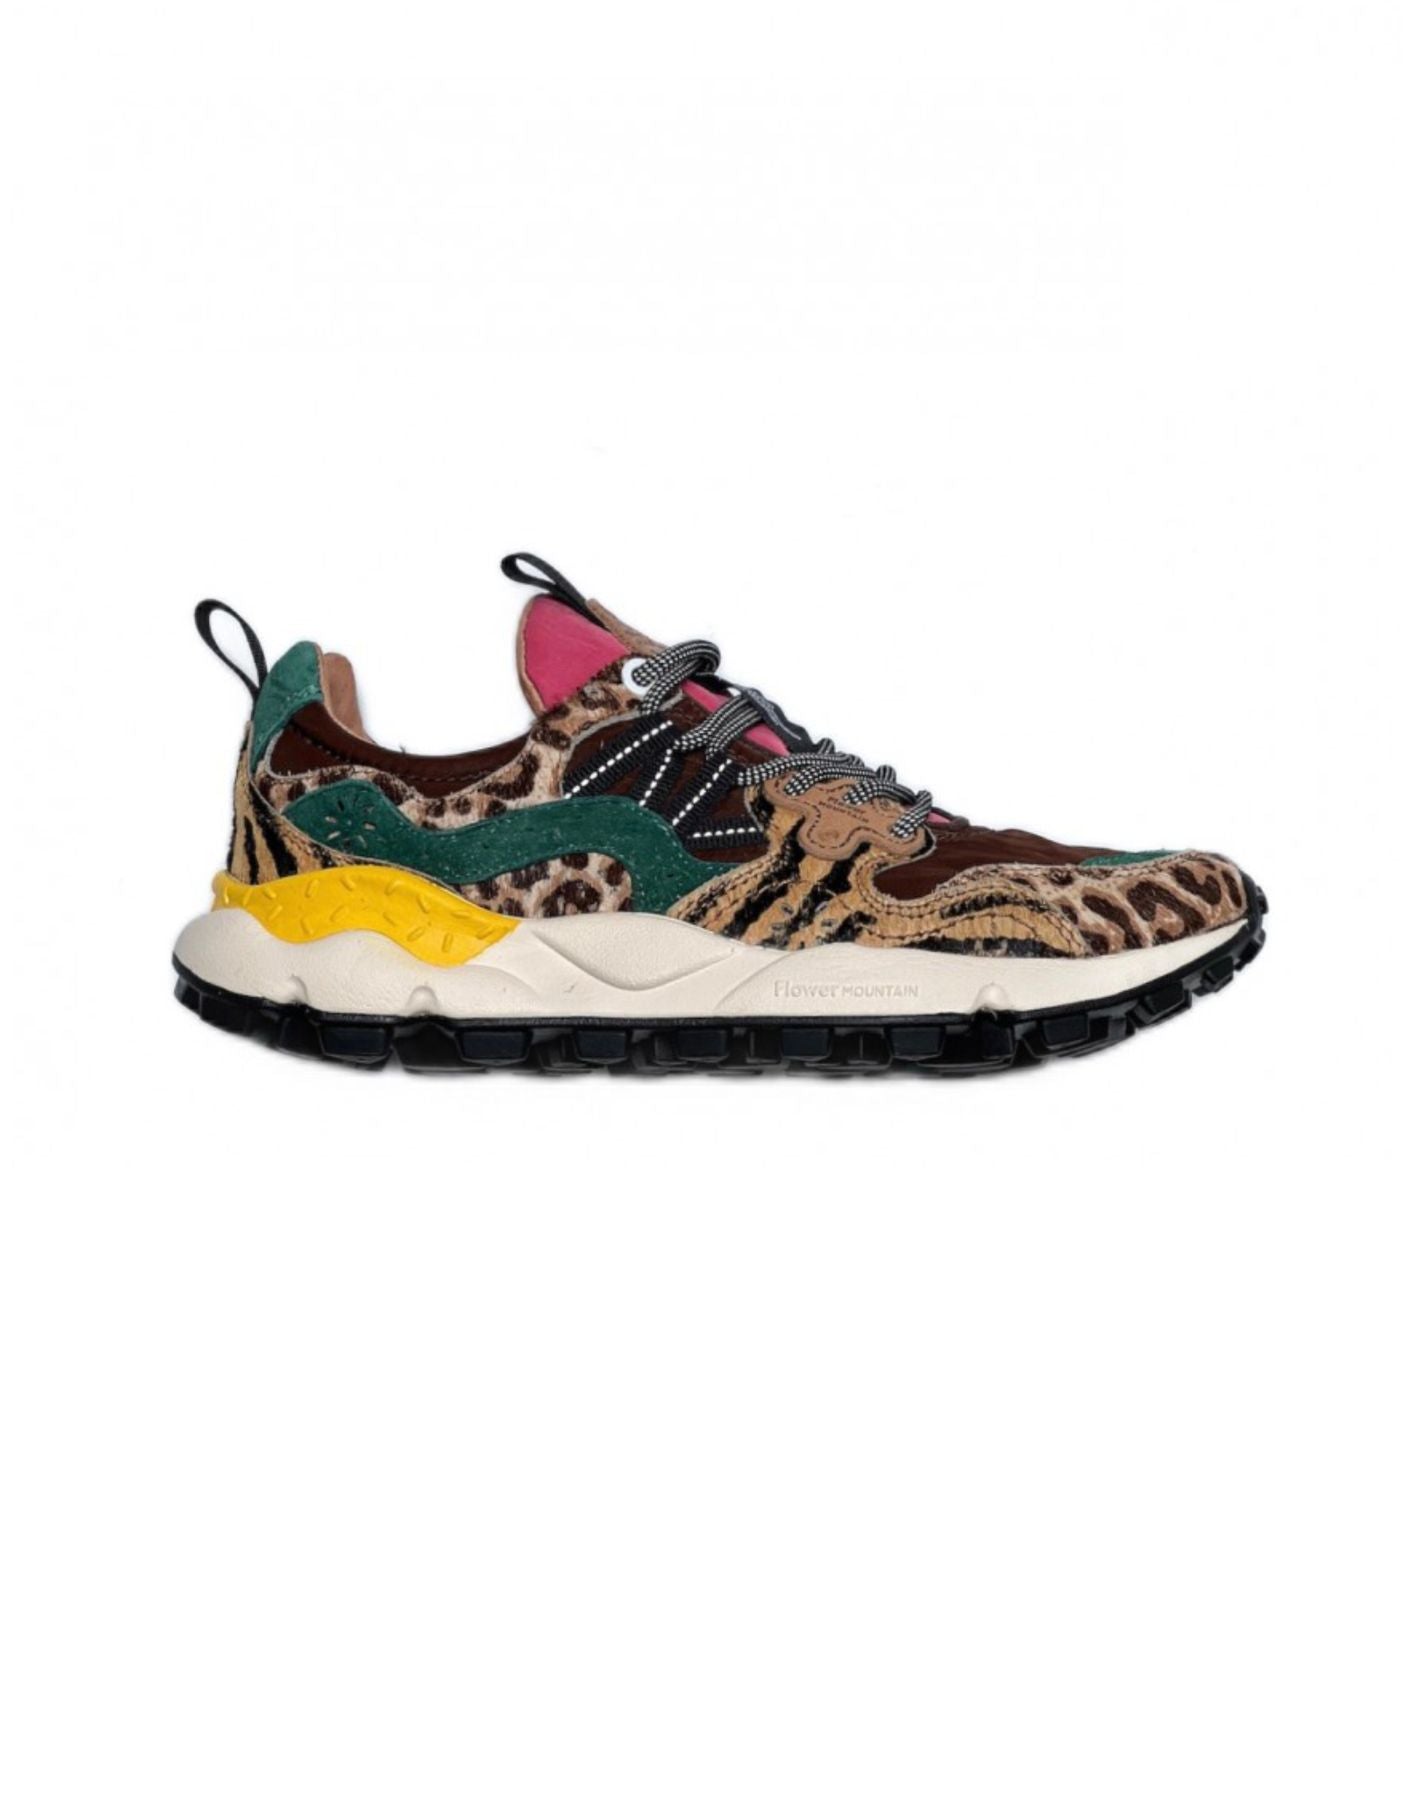 Shoes for woman YAMANO 3 UNI BROWN MULTI Flower Mountain